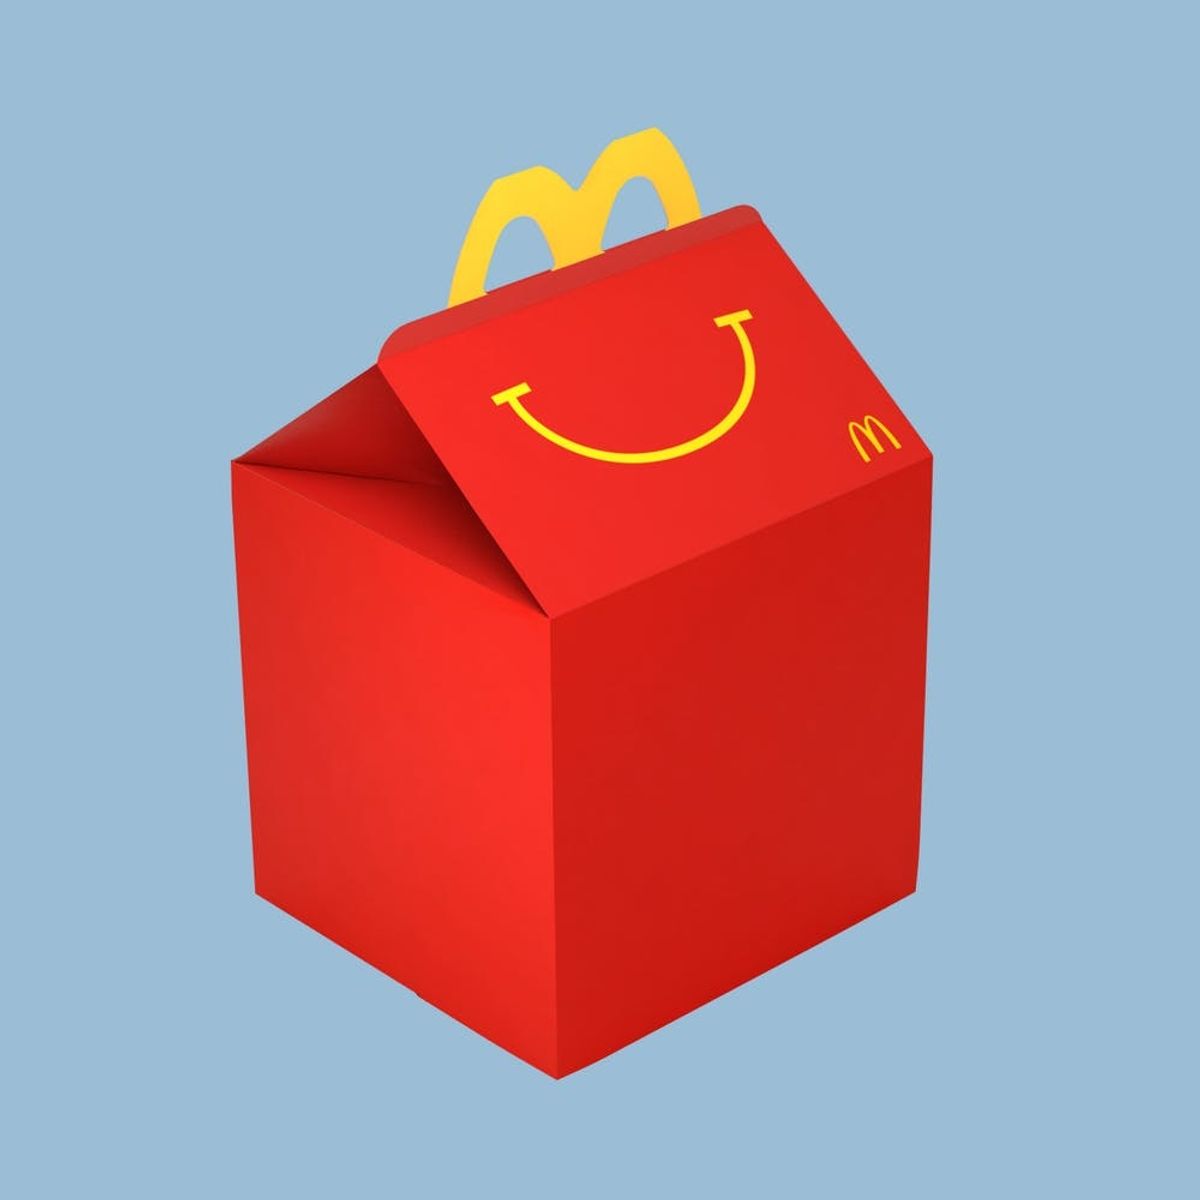 WTF: You Won’t Believe What You Can Make With a Happy Meal Box